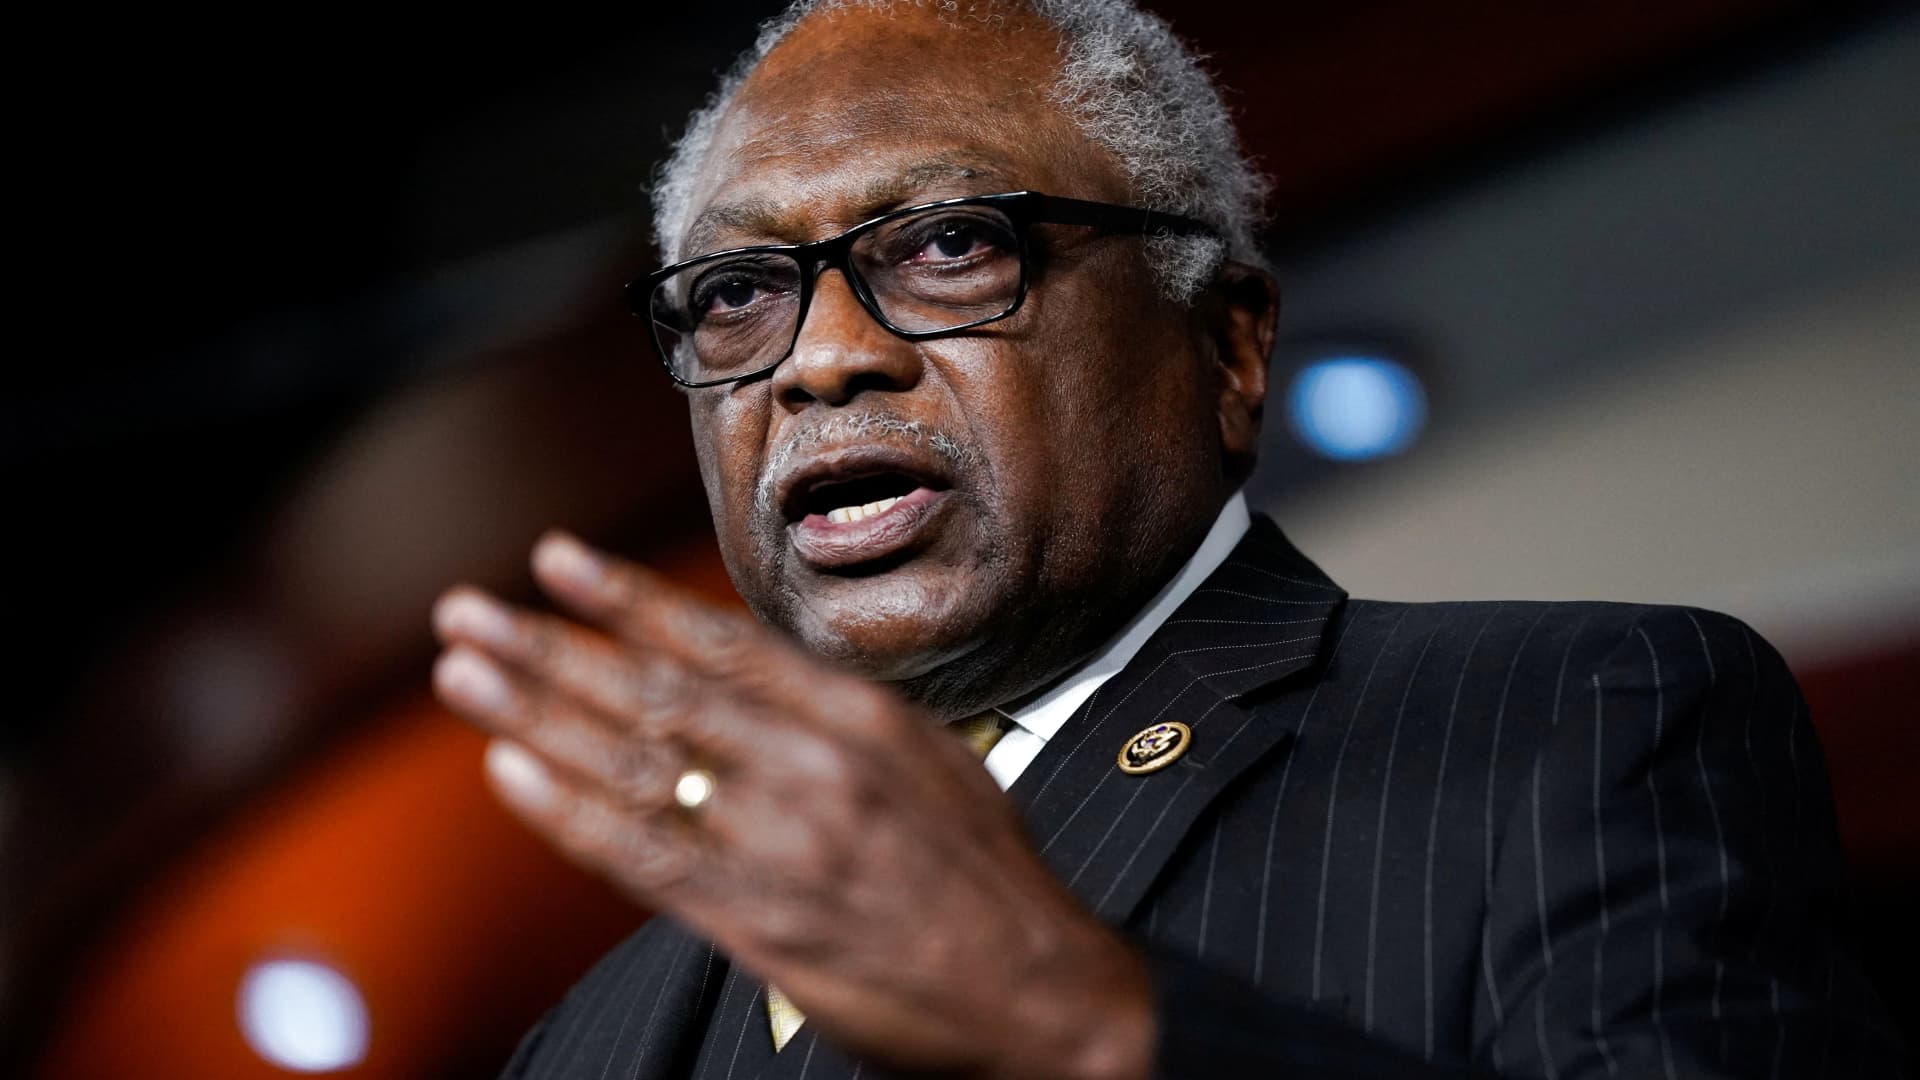 TransUnion, Equifax, Experian may have violated credit reporting rules, Rep. Jim Clyburn says